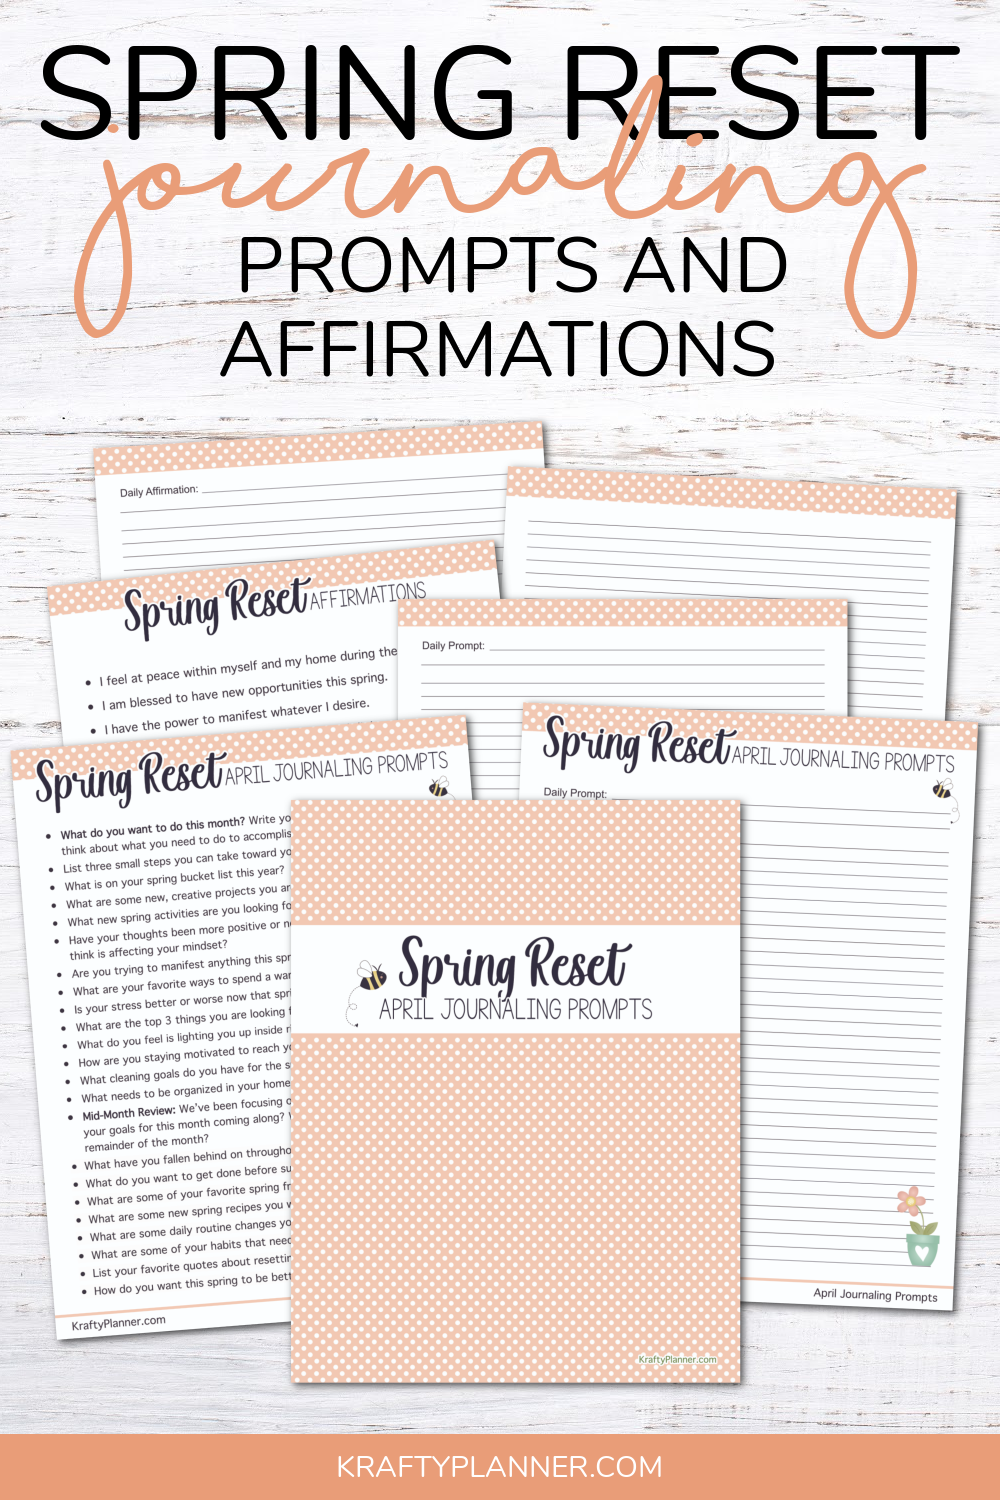 Spring Reset Journaling Prompts and Affirmations